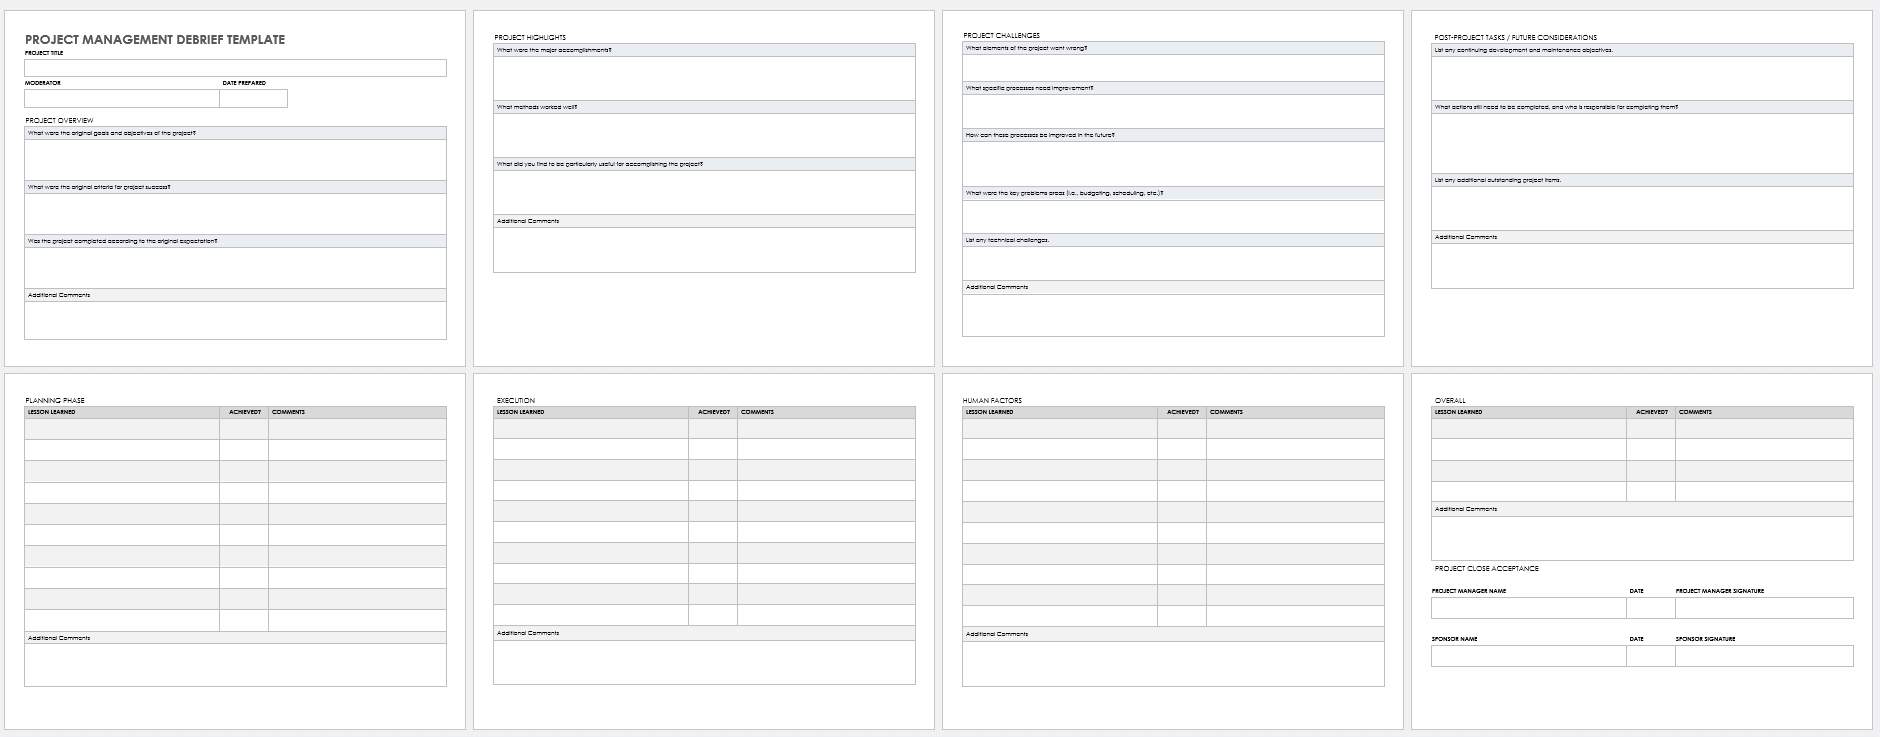 Project Management Debrief Template